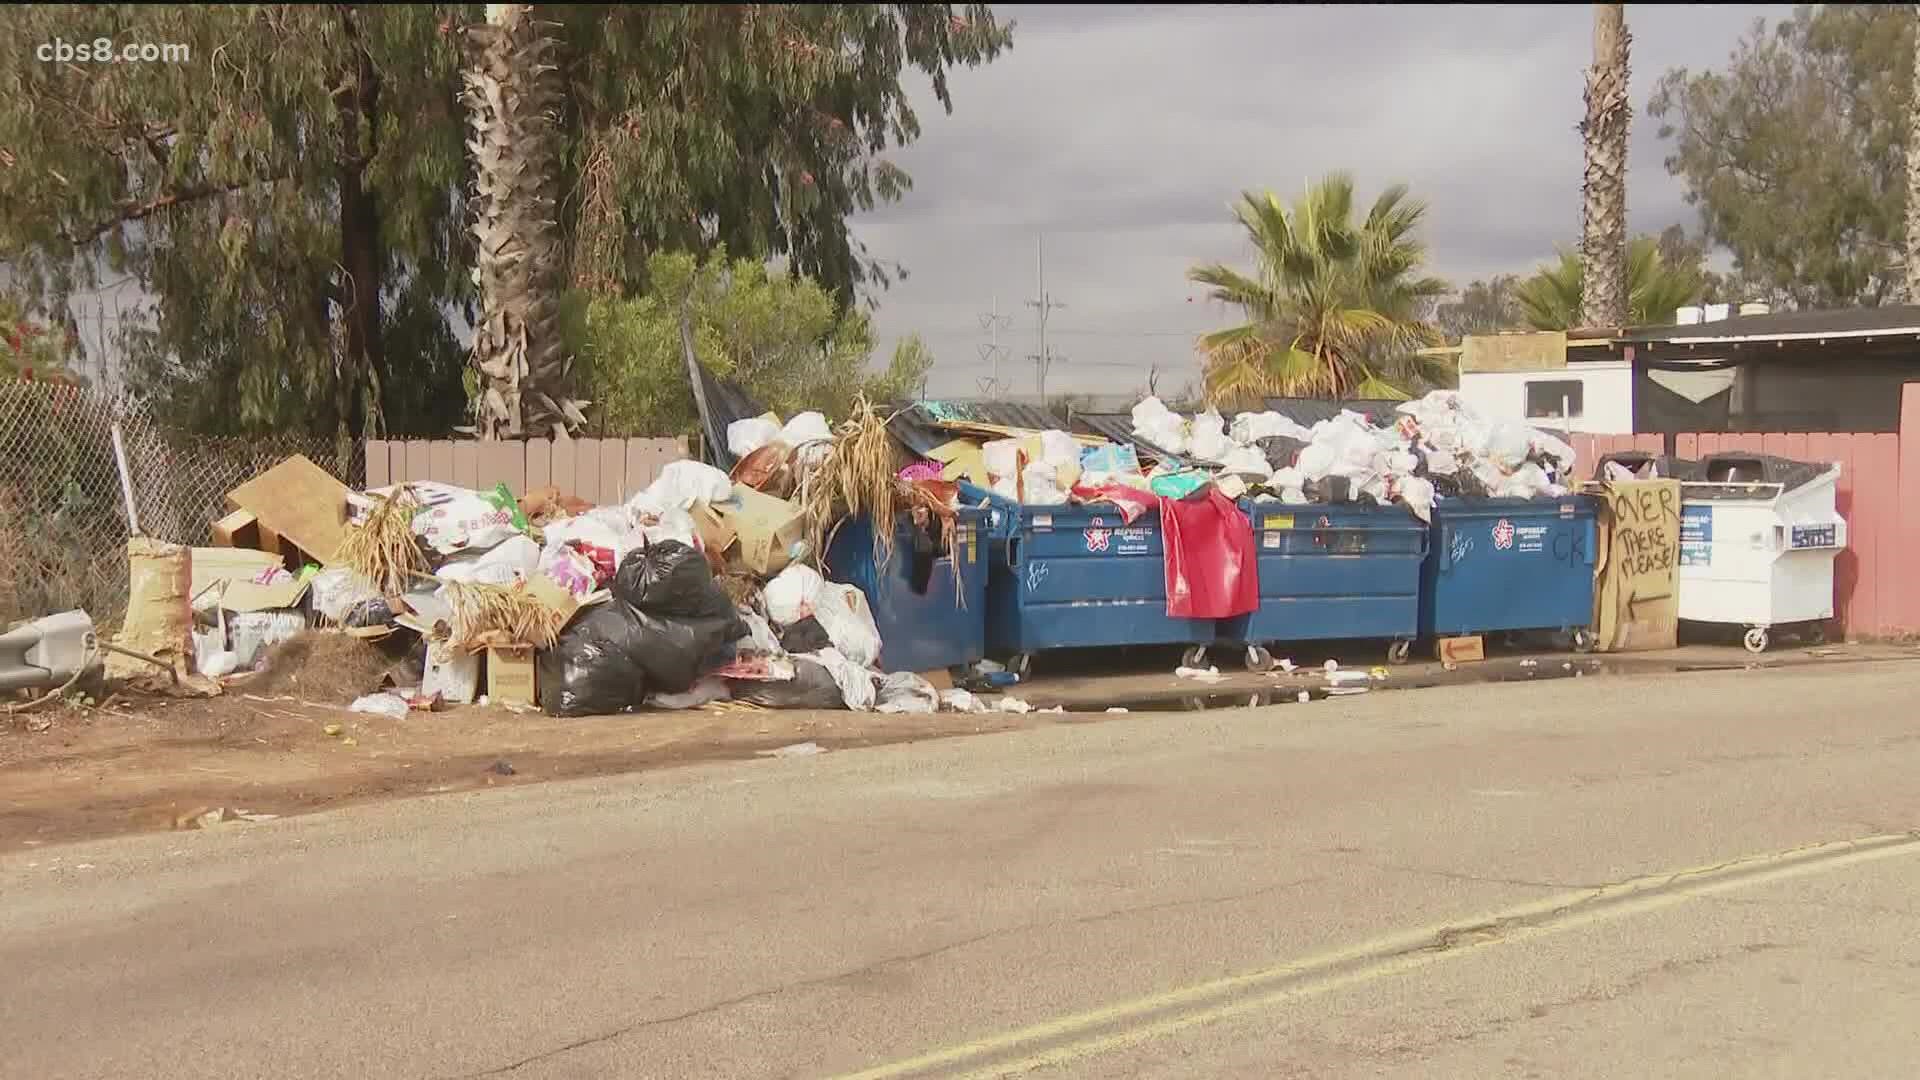 Following a month-long dispute, sanitation workers vote to end the strike Monday with Republic Services.